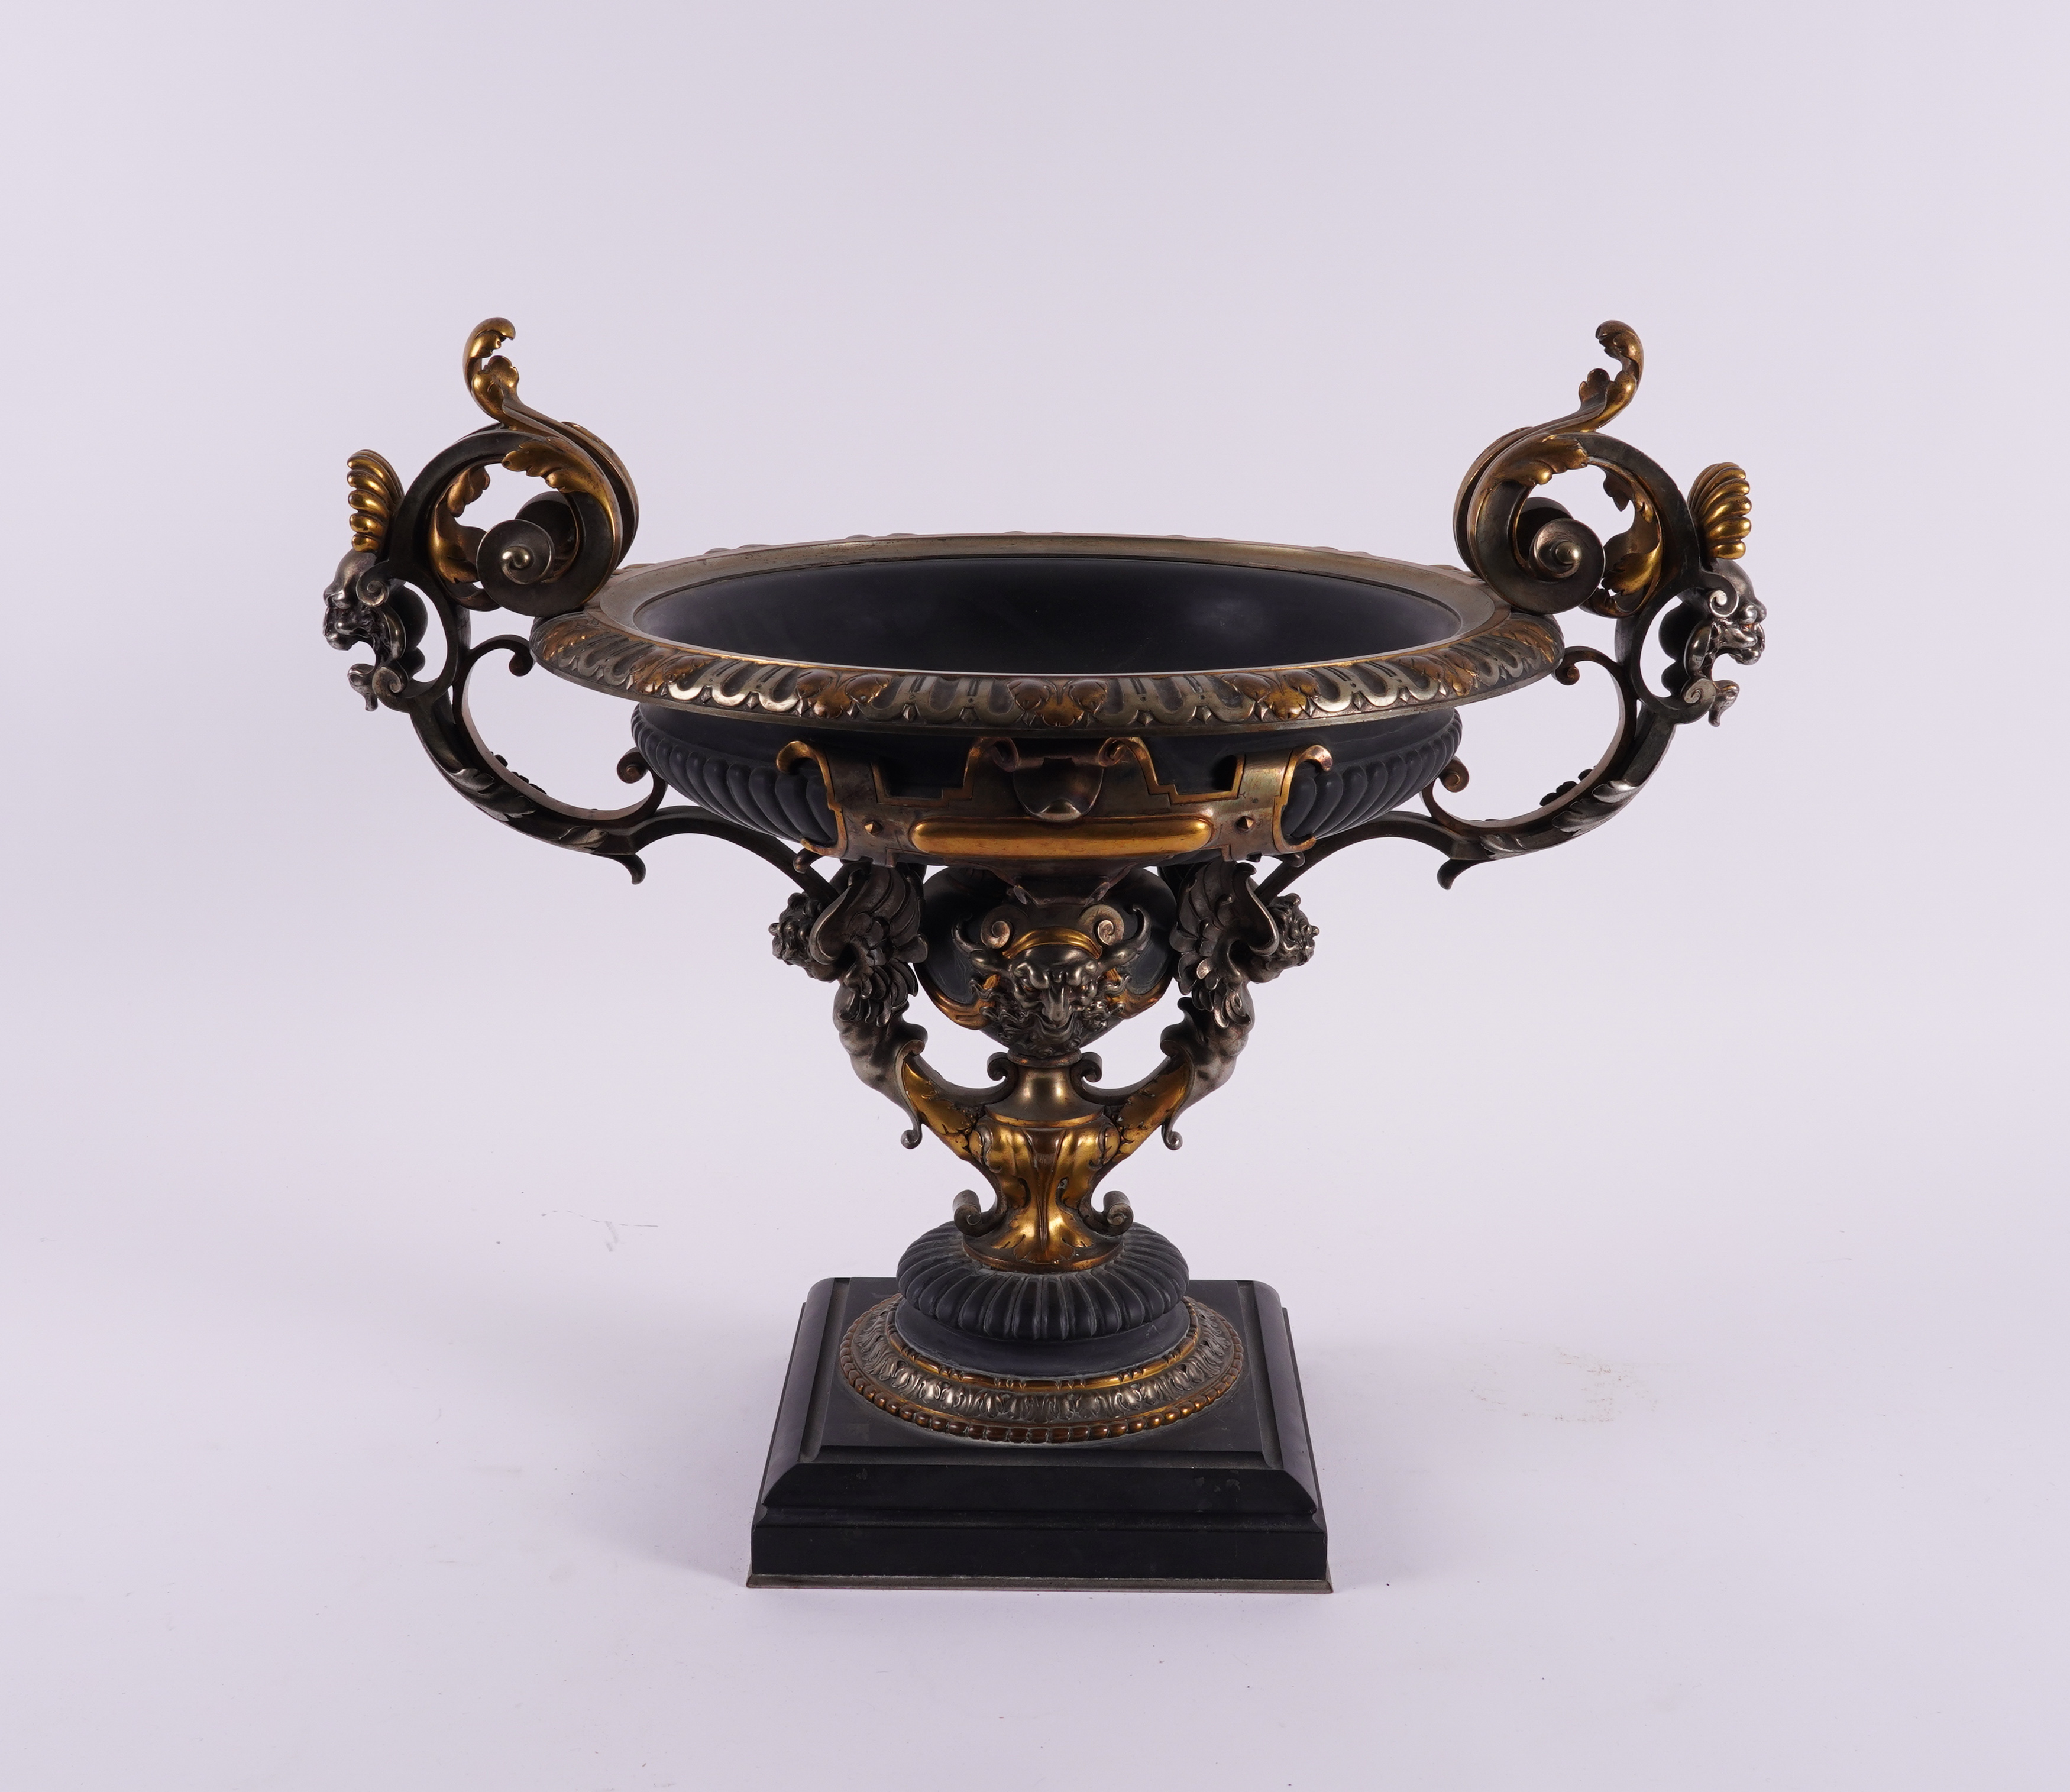 FERDINAND BARBEDIENNE, PARIS: A FRENCH GILT AND SILVERED BRONZE TWIN HANDLED TAZZA - Image 2 of 8